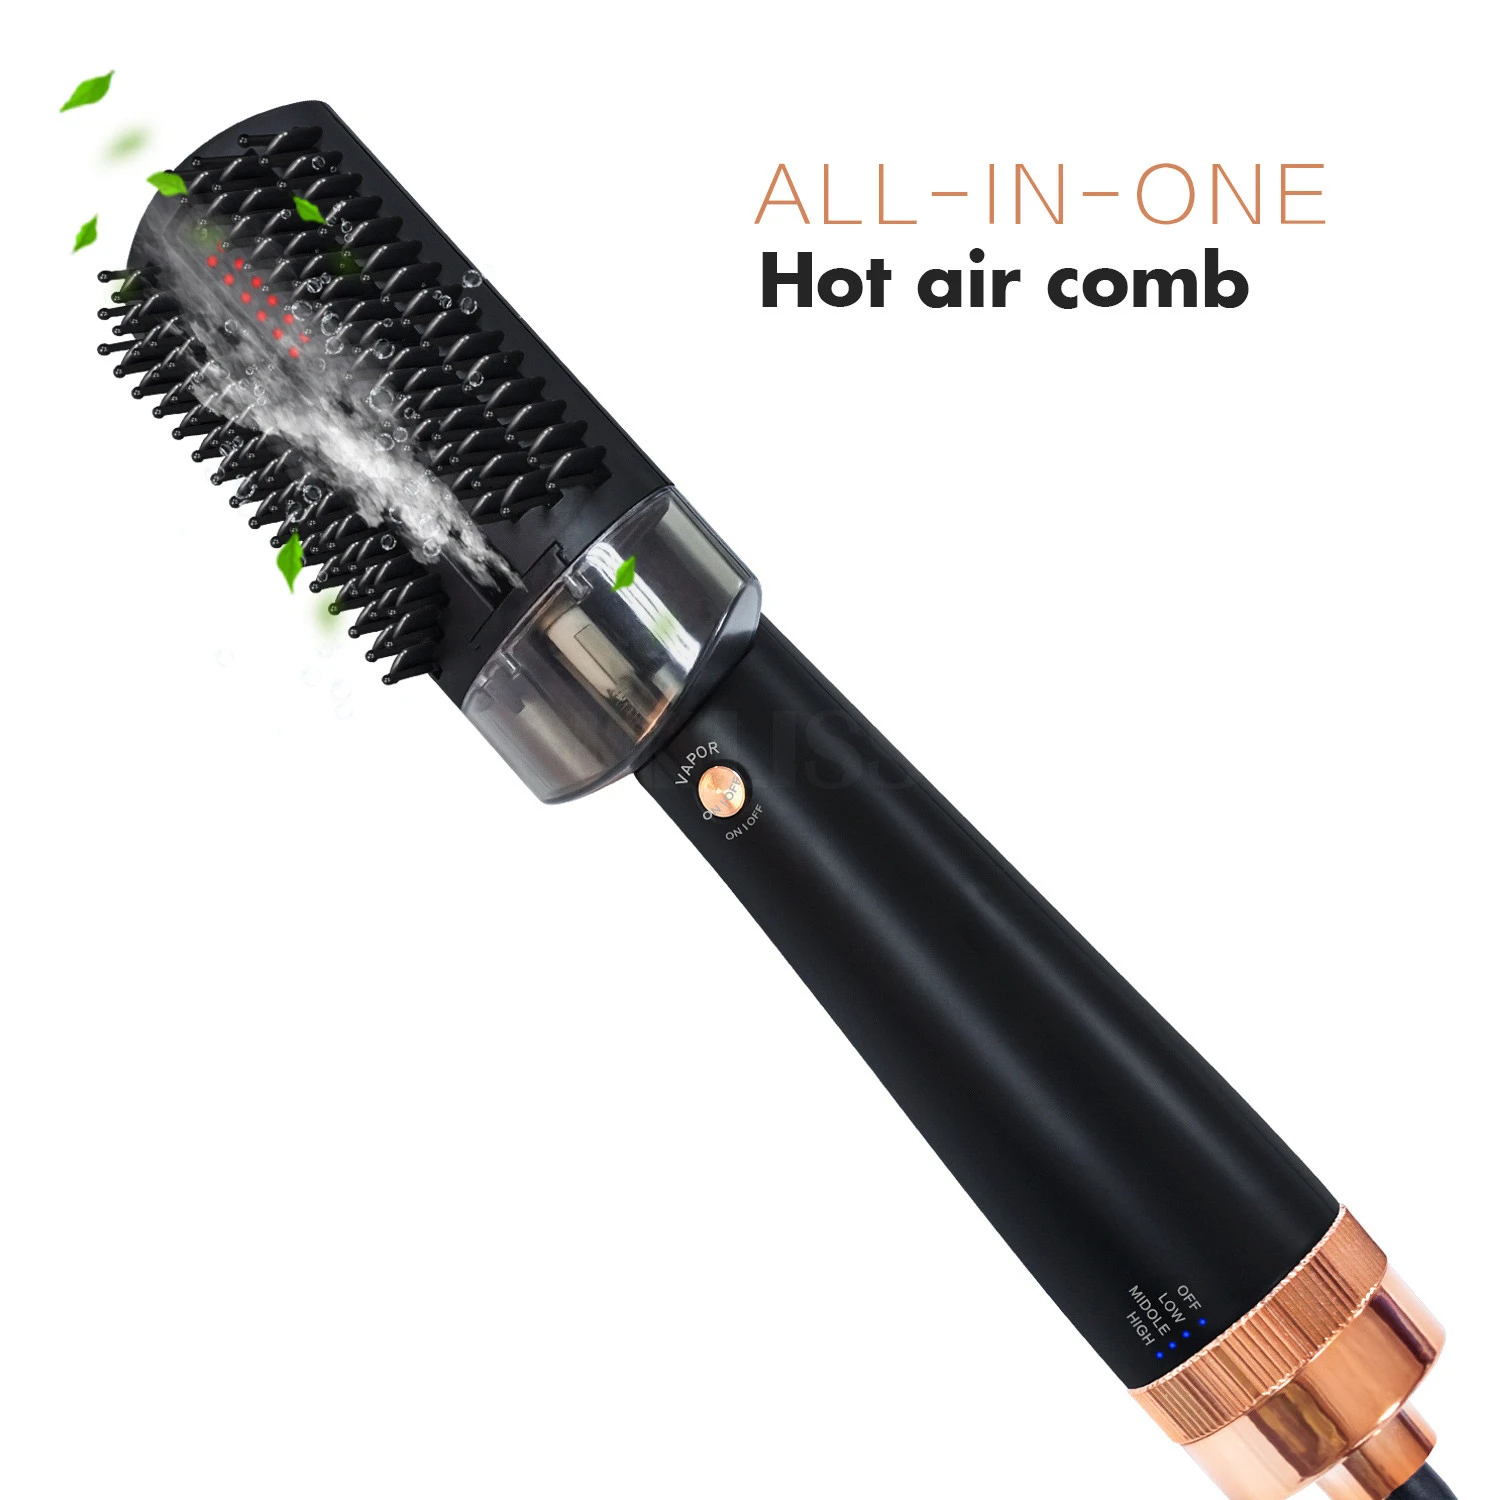 Infrared and steam hot air comb 3 in 1 Hair Dryer Volumiser Professional One Step Fast Straight Hot Air Styler Brush